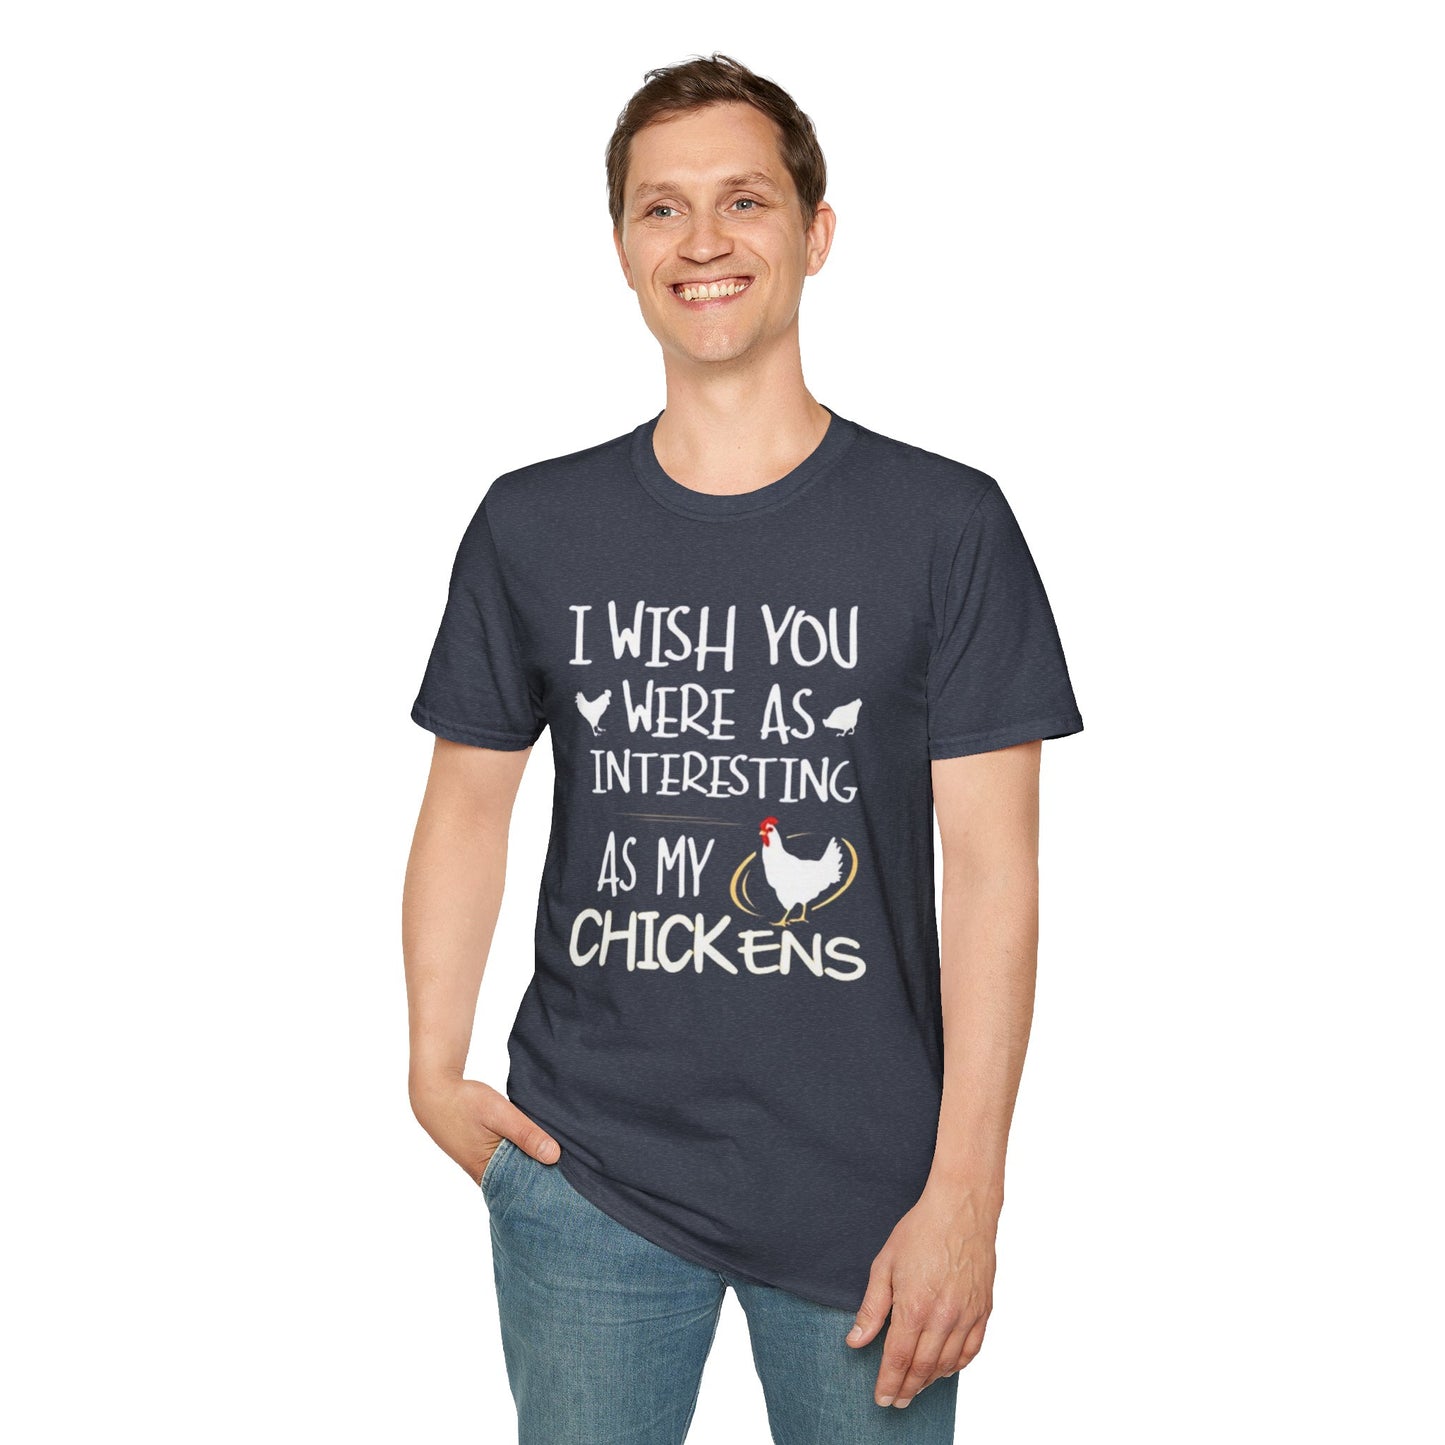 I wish you were as interesting as my chickens - Unisex Softstyle T-Shirt